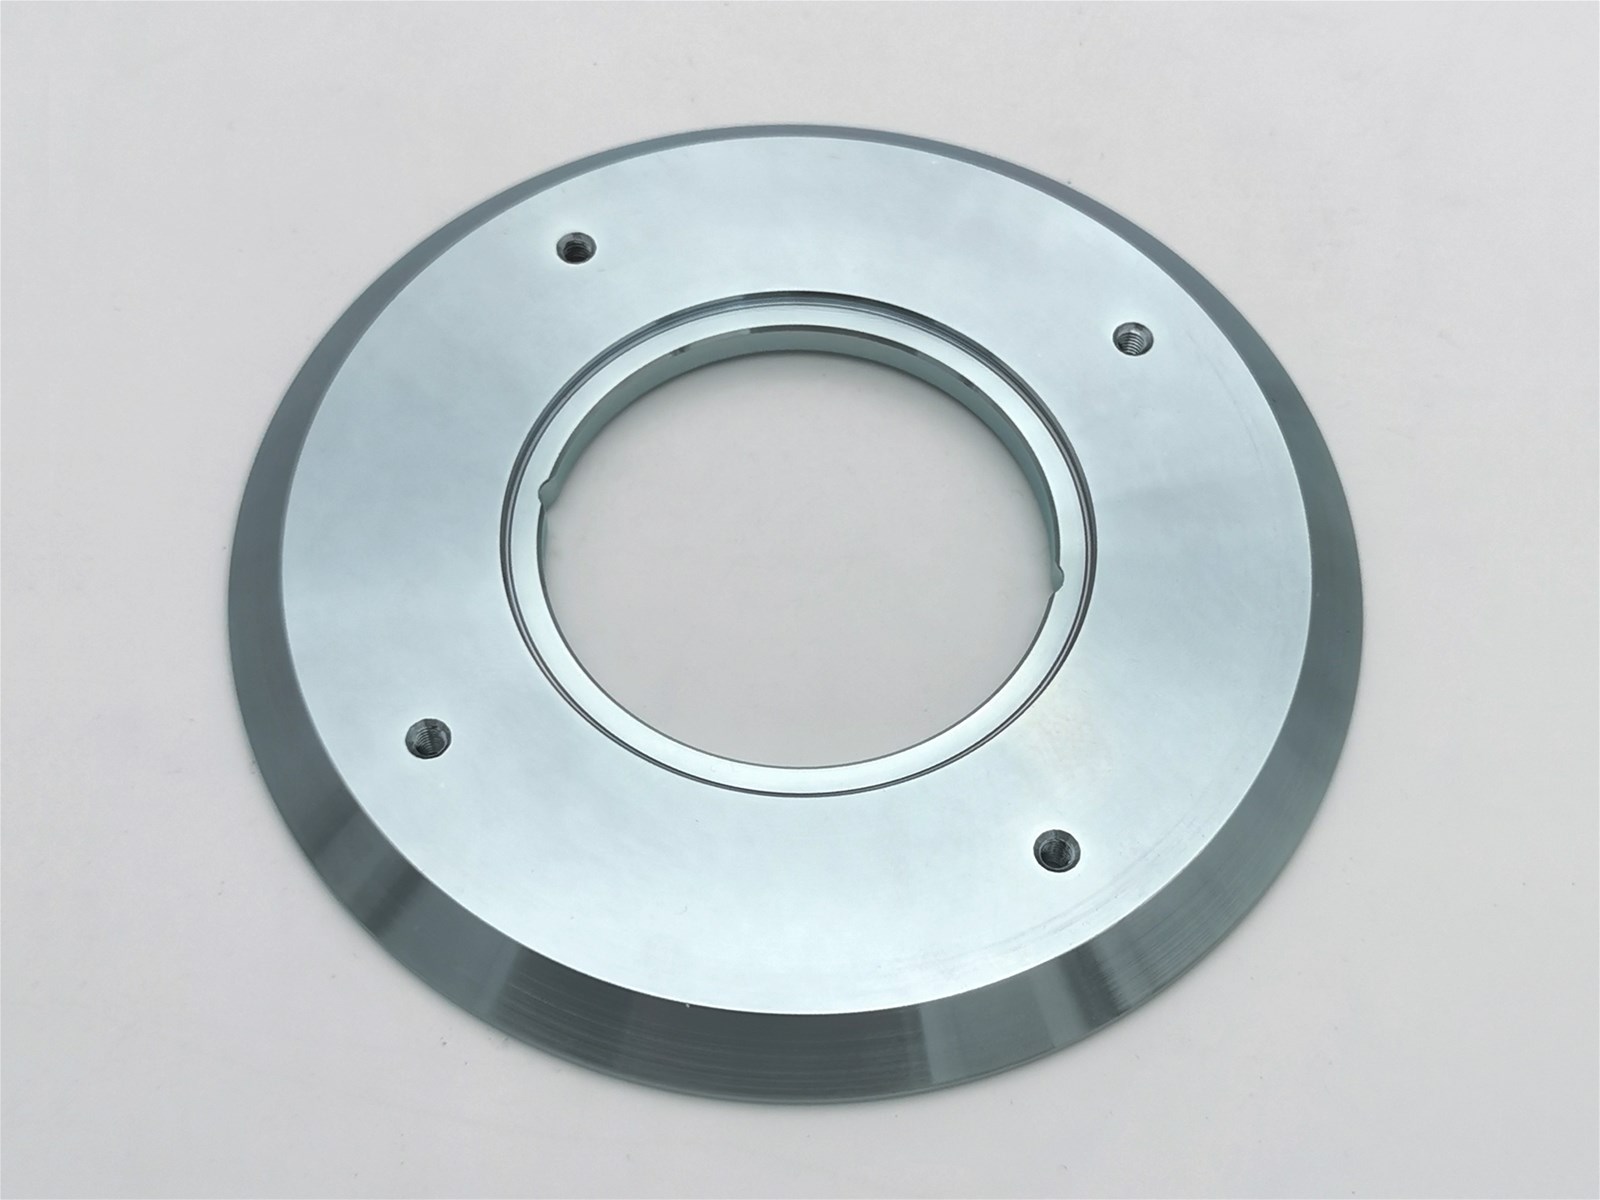 Loudspeaker Parts: Spring Washer, Surface Treatment CR3 Clear Rack Plating, Coating, Customized, Top Plate